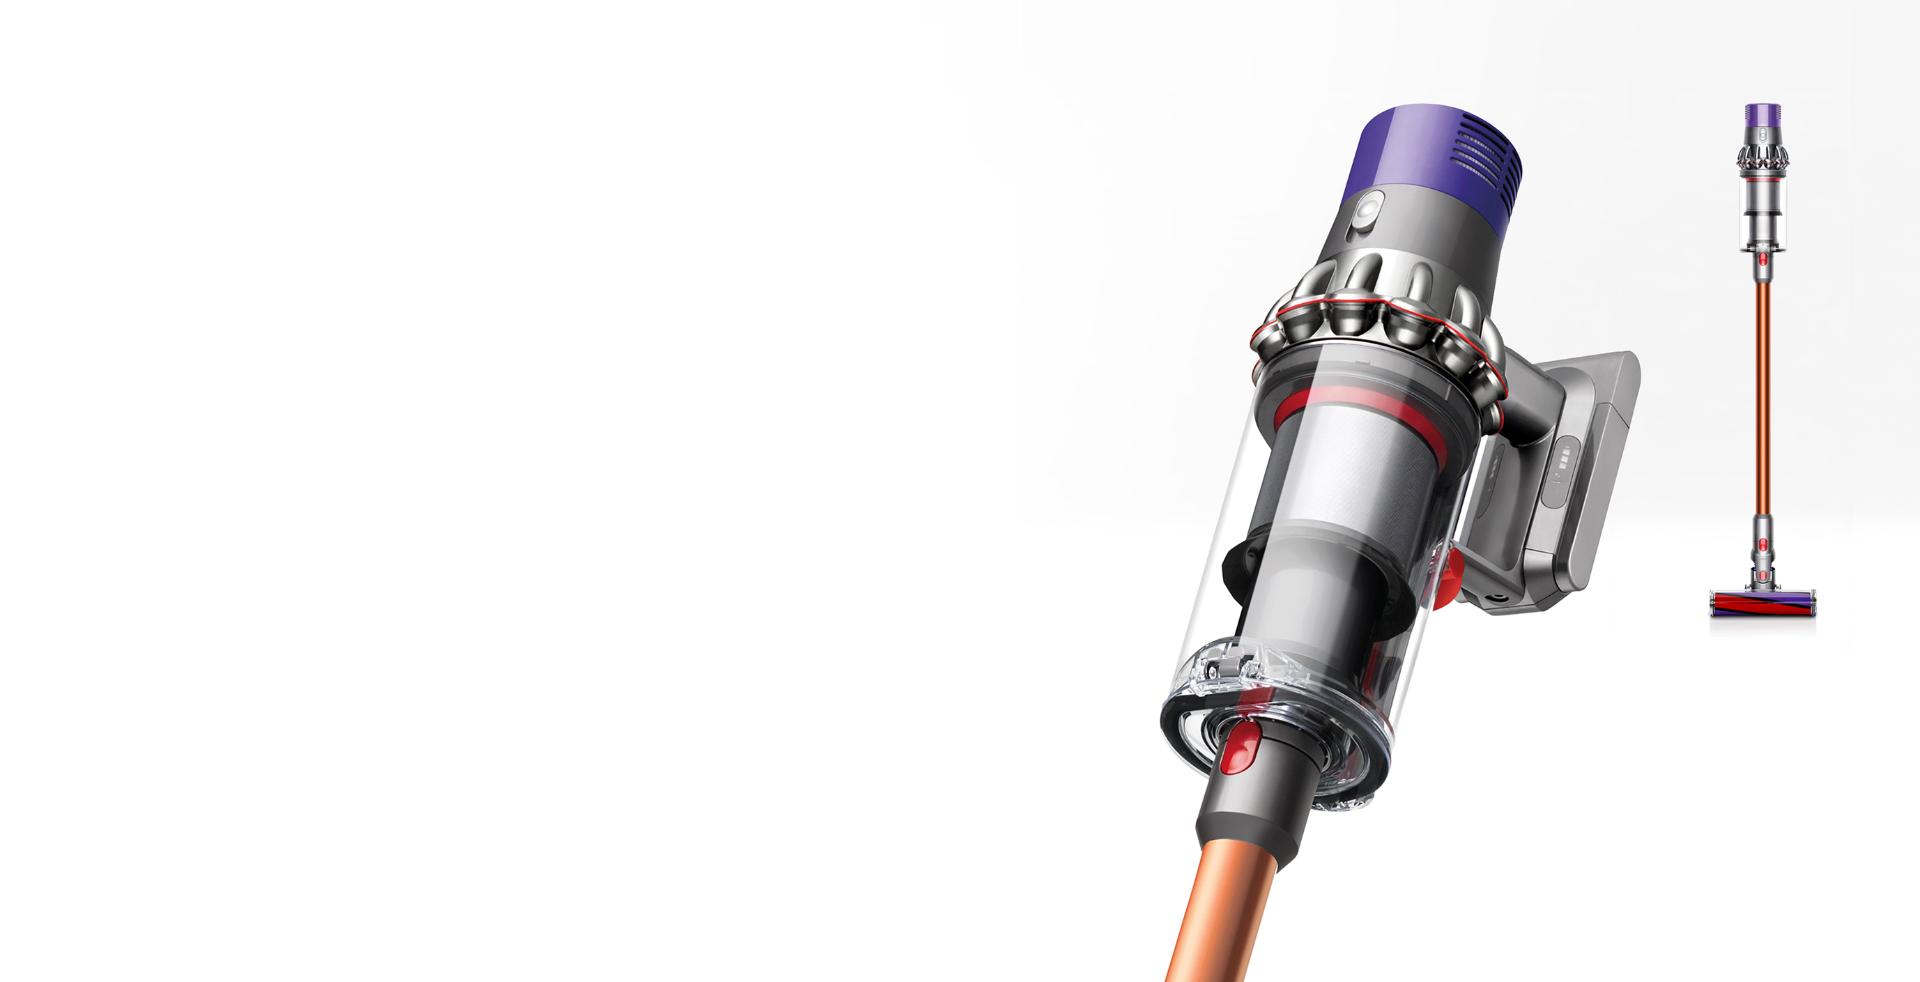 Dyson Cyclone V10 vacuum shown in both full view and close-up.